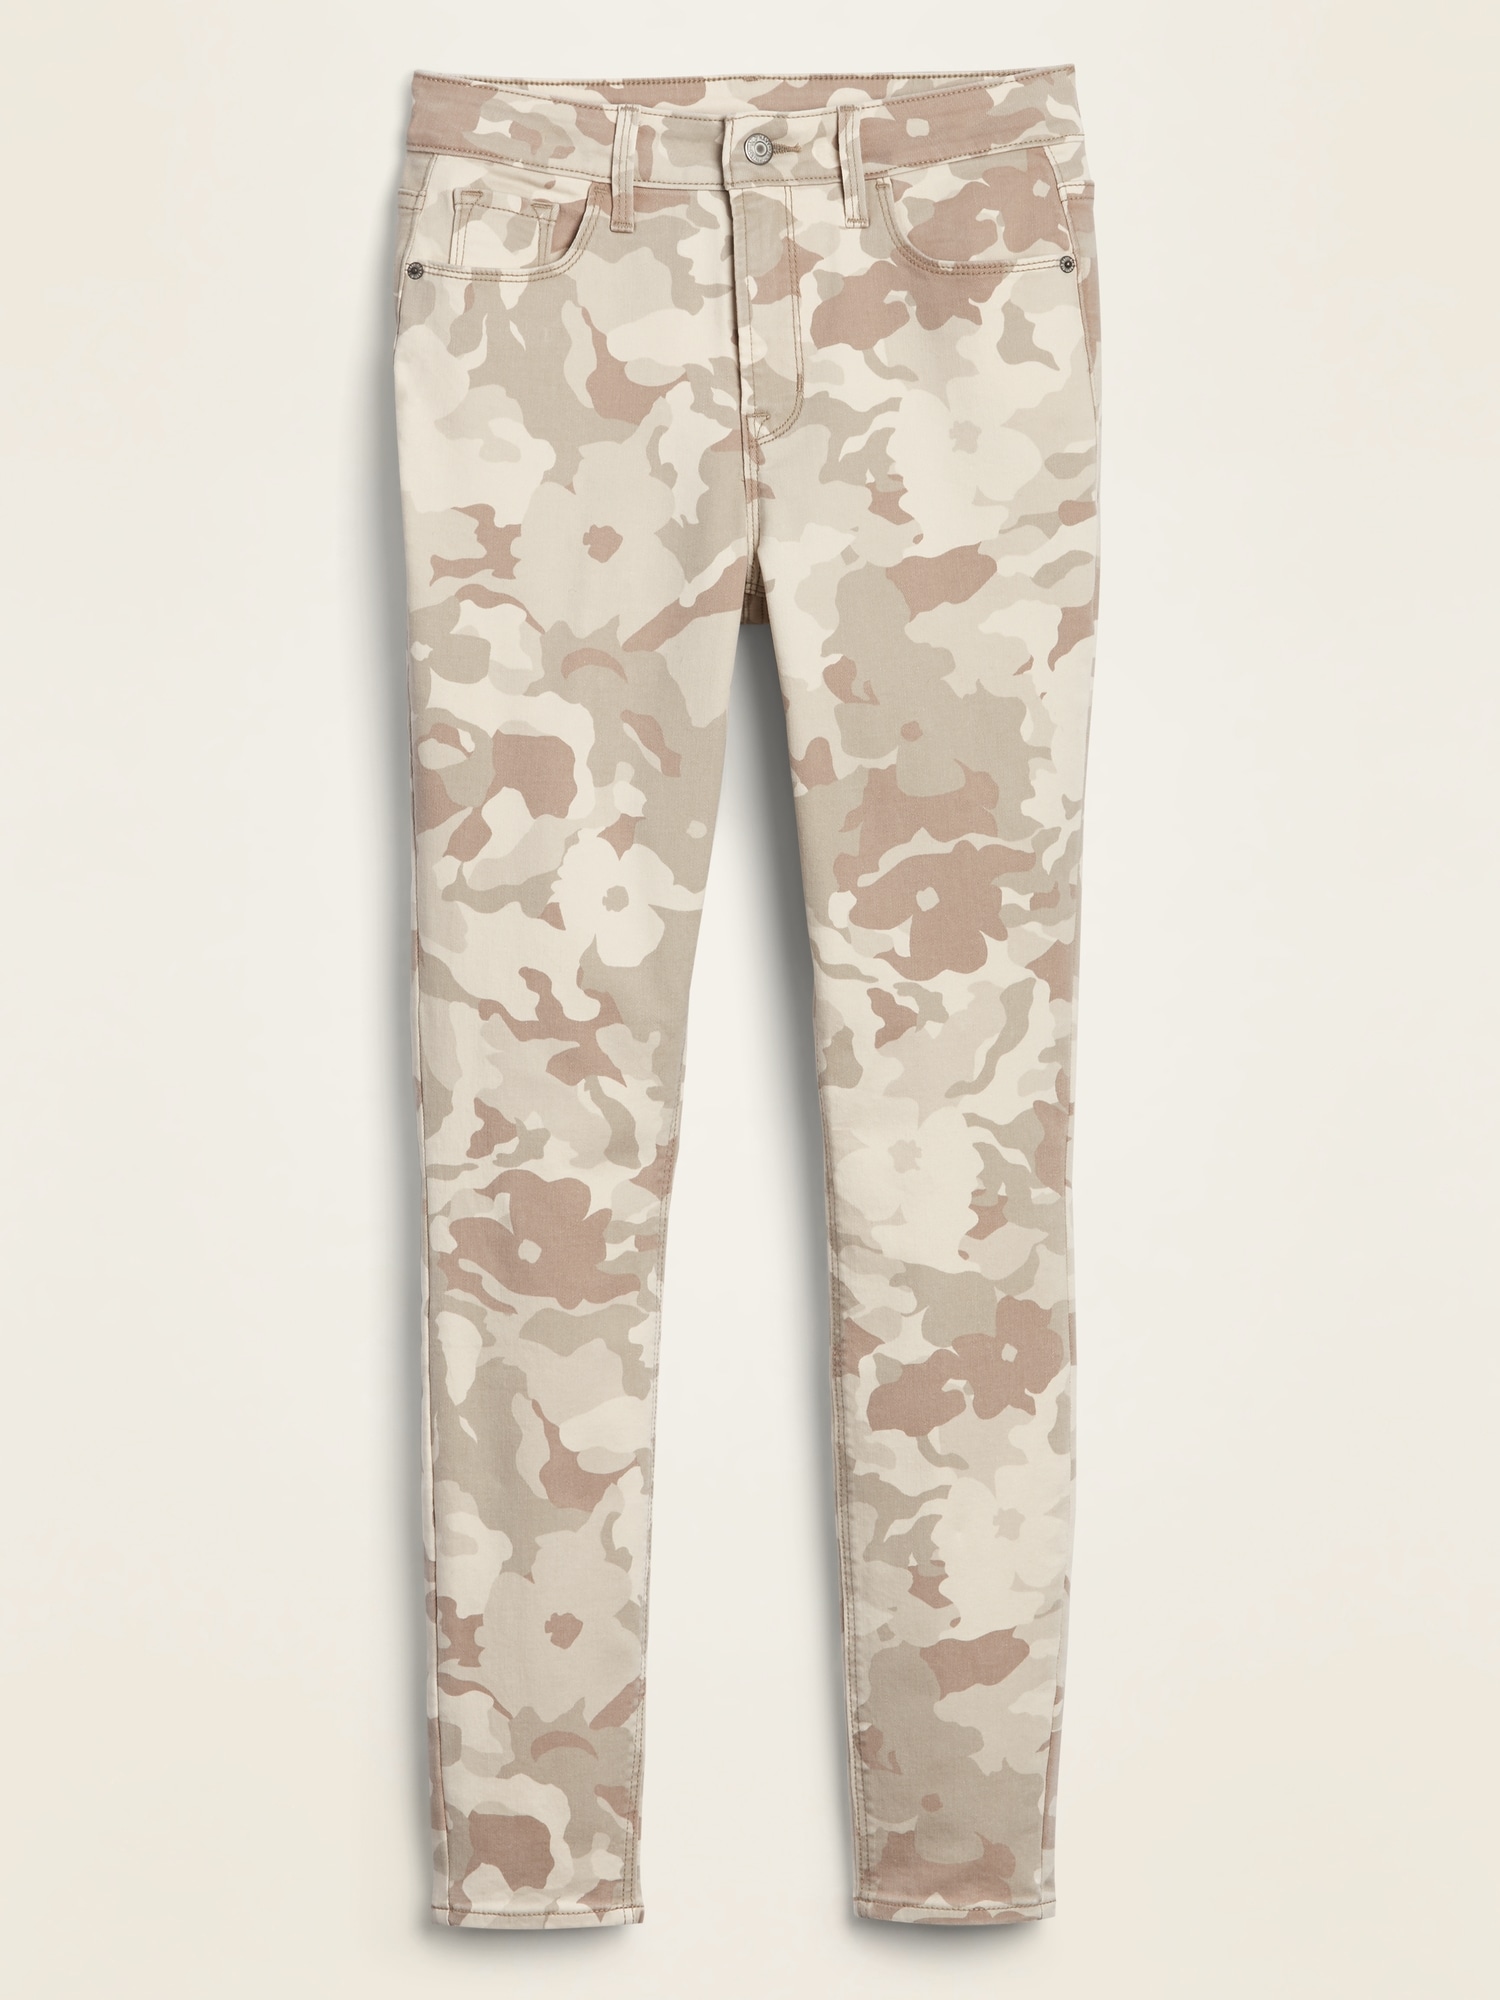 camo jeans old navy